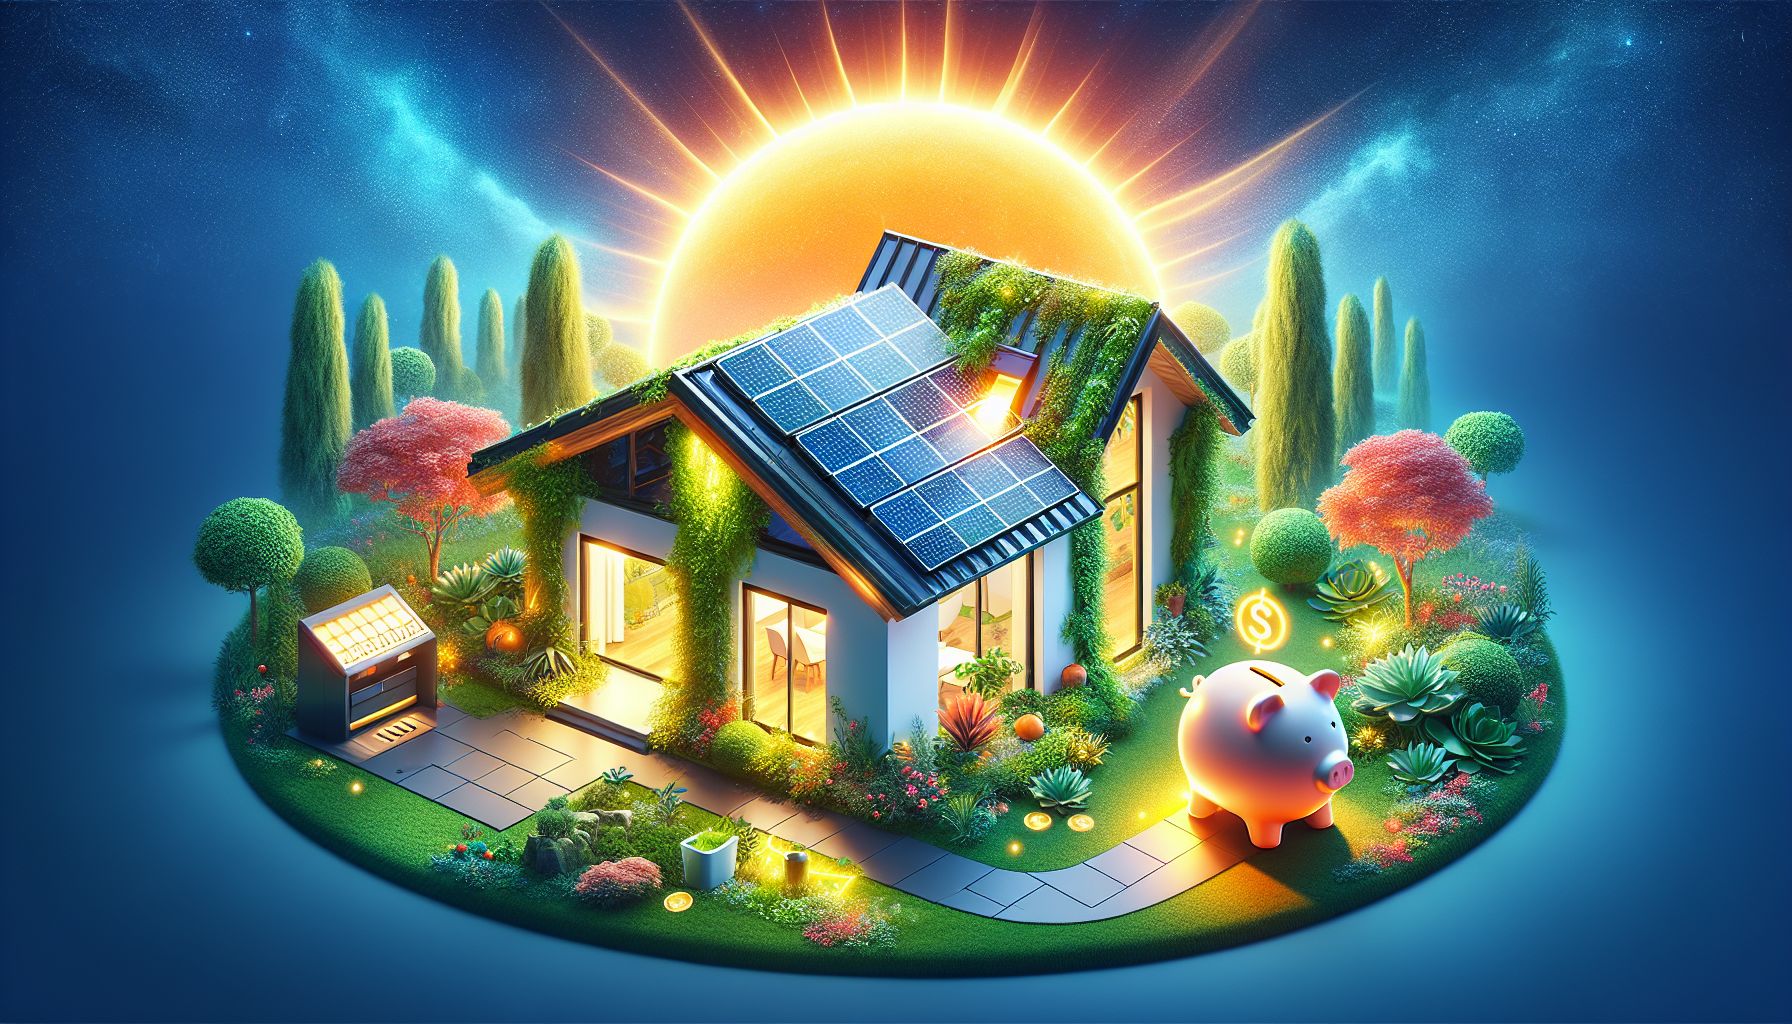 Illustration of home enhancement with solar power systems